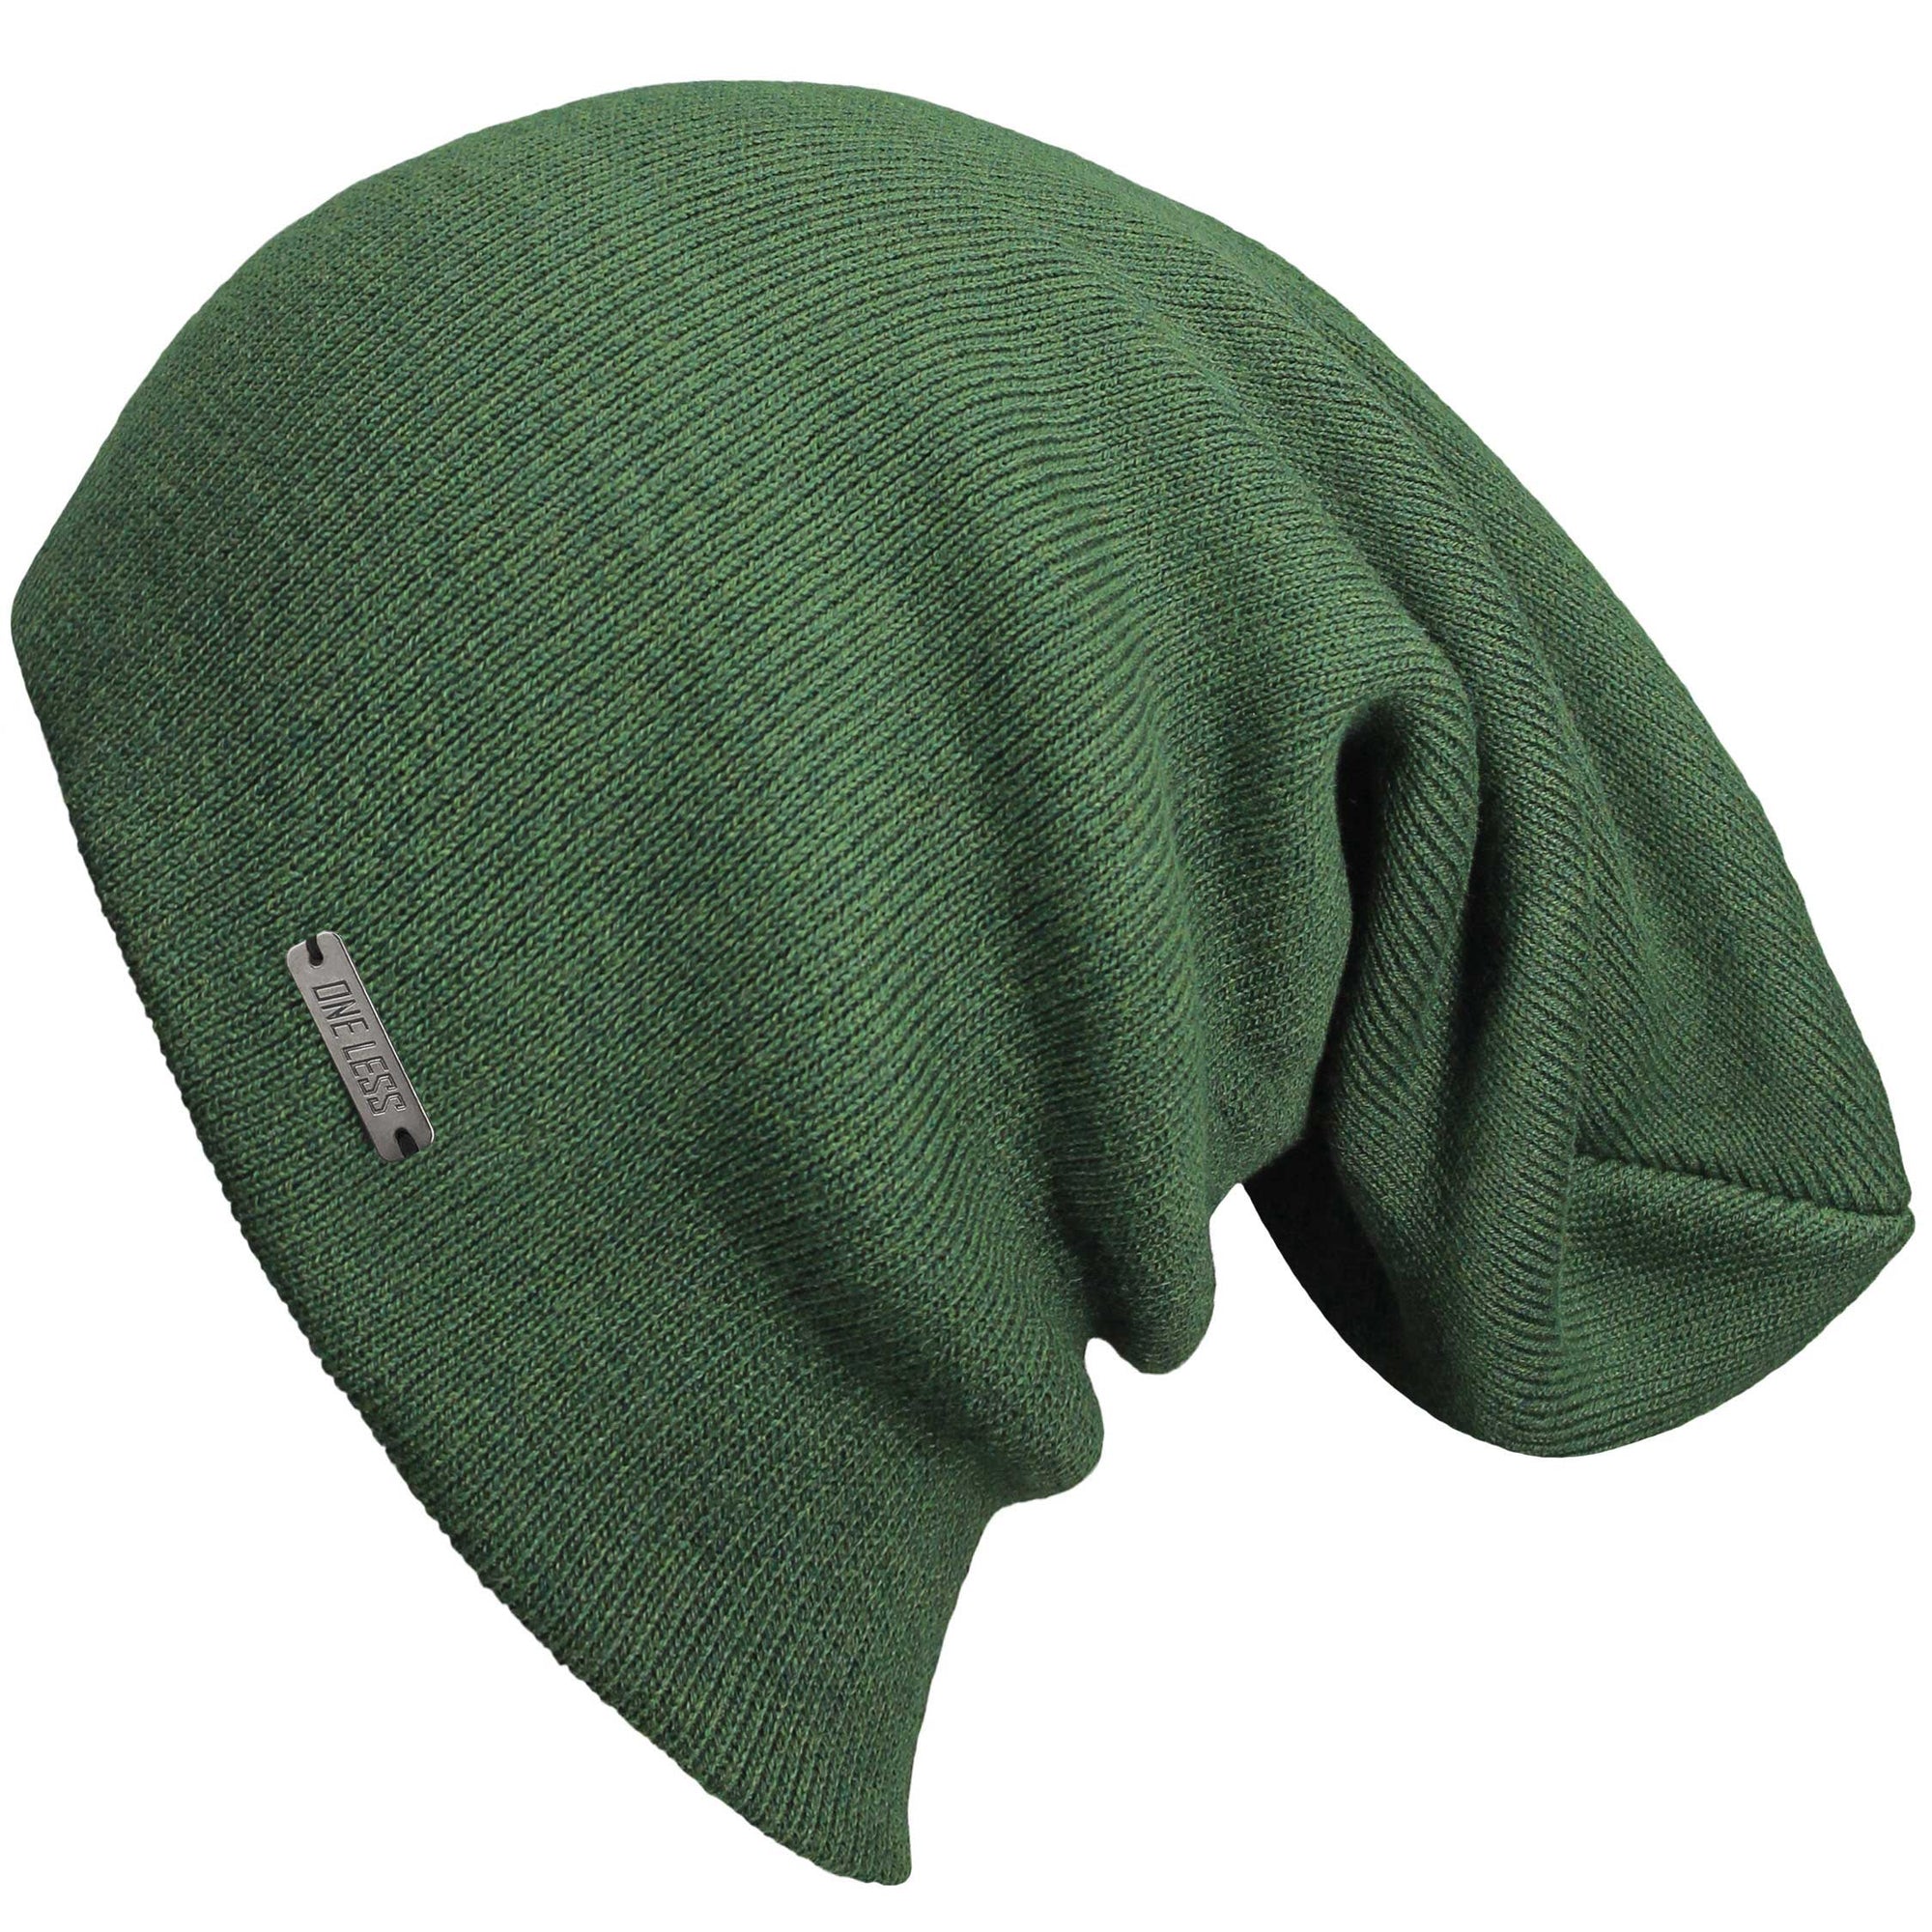 The - Supply Performance Fleece King Fifth and Flex - XL Beanie Mens Outlier